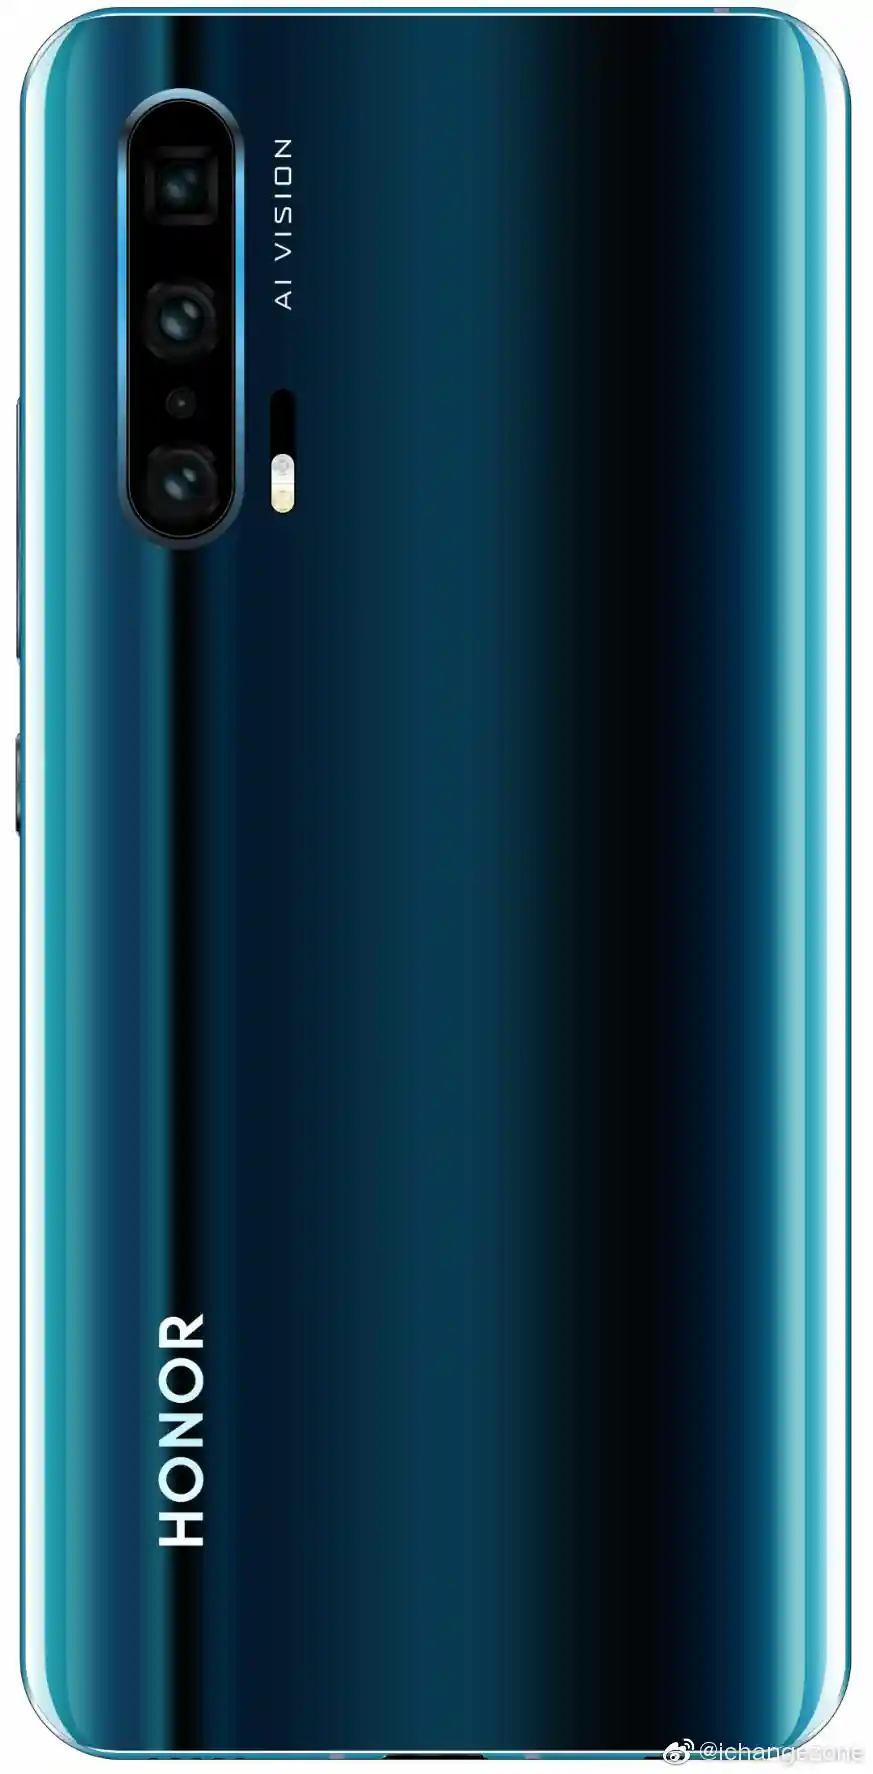  Resurrection Remix  Huawei Honor 20 Pro  Android 10, 9.1(0)